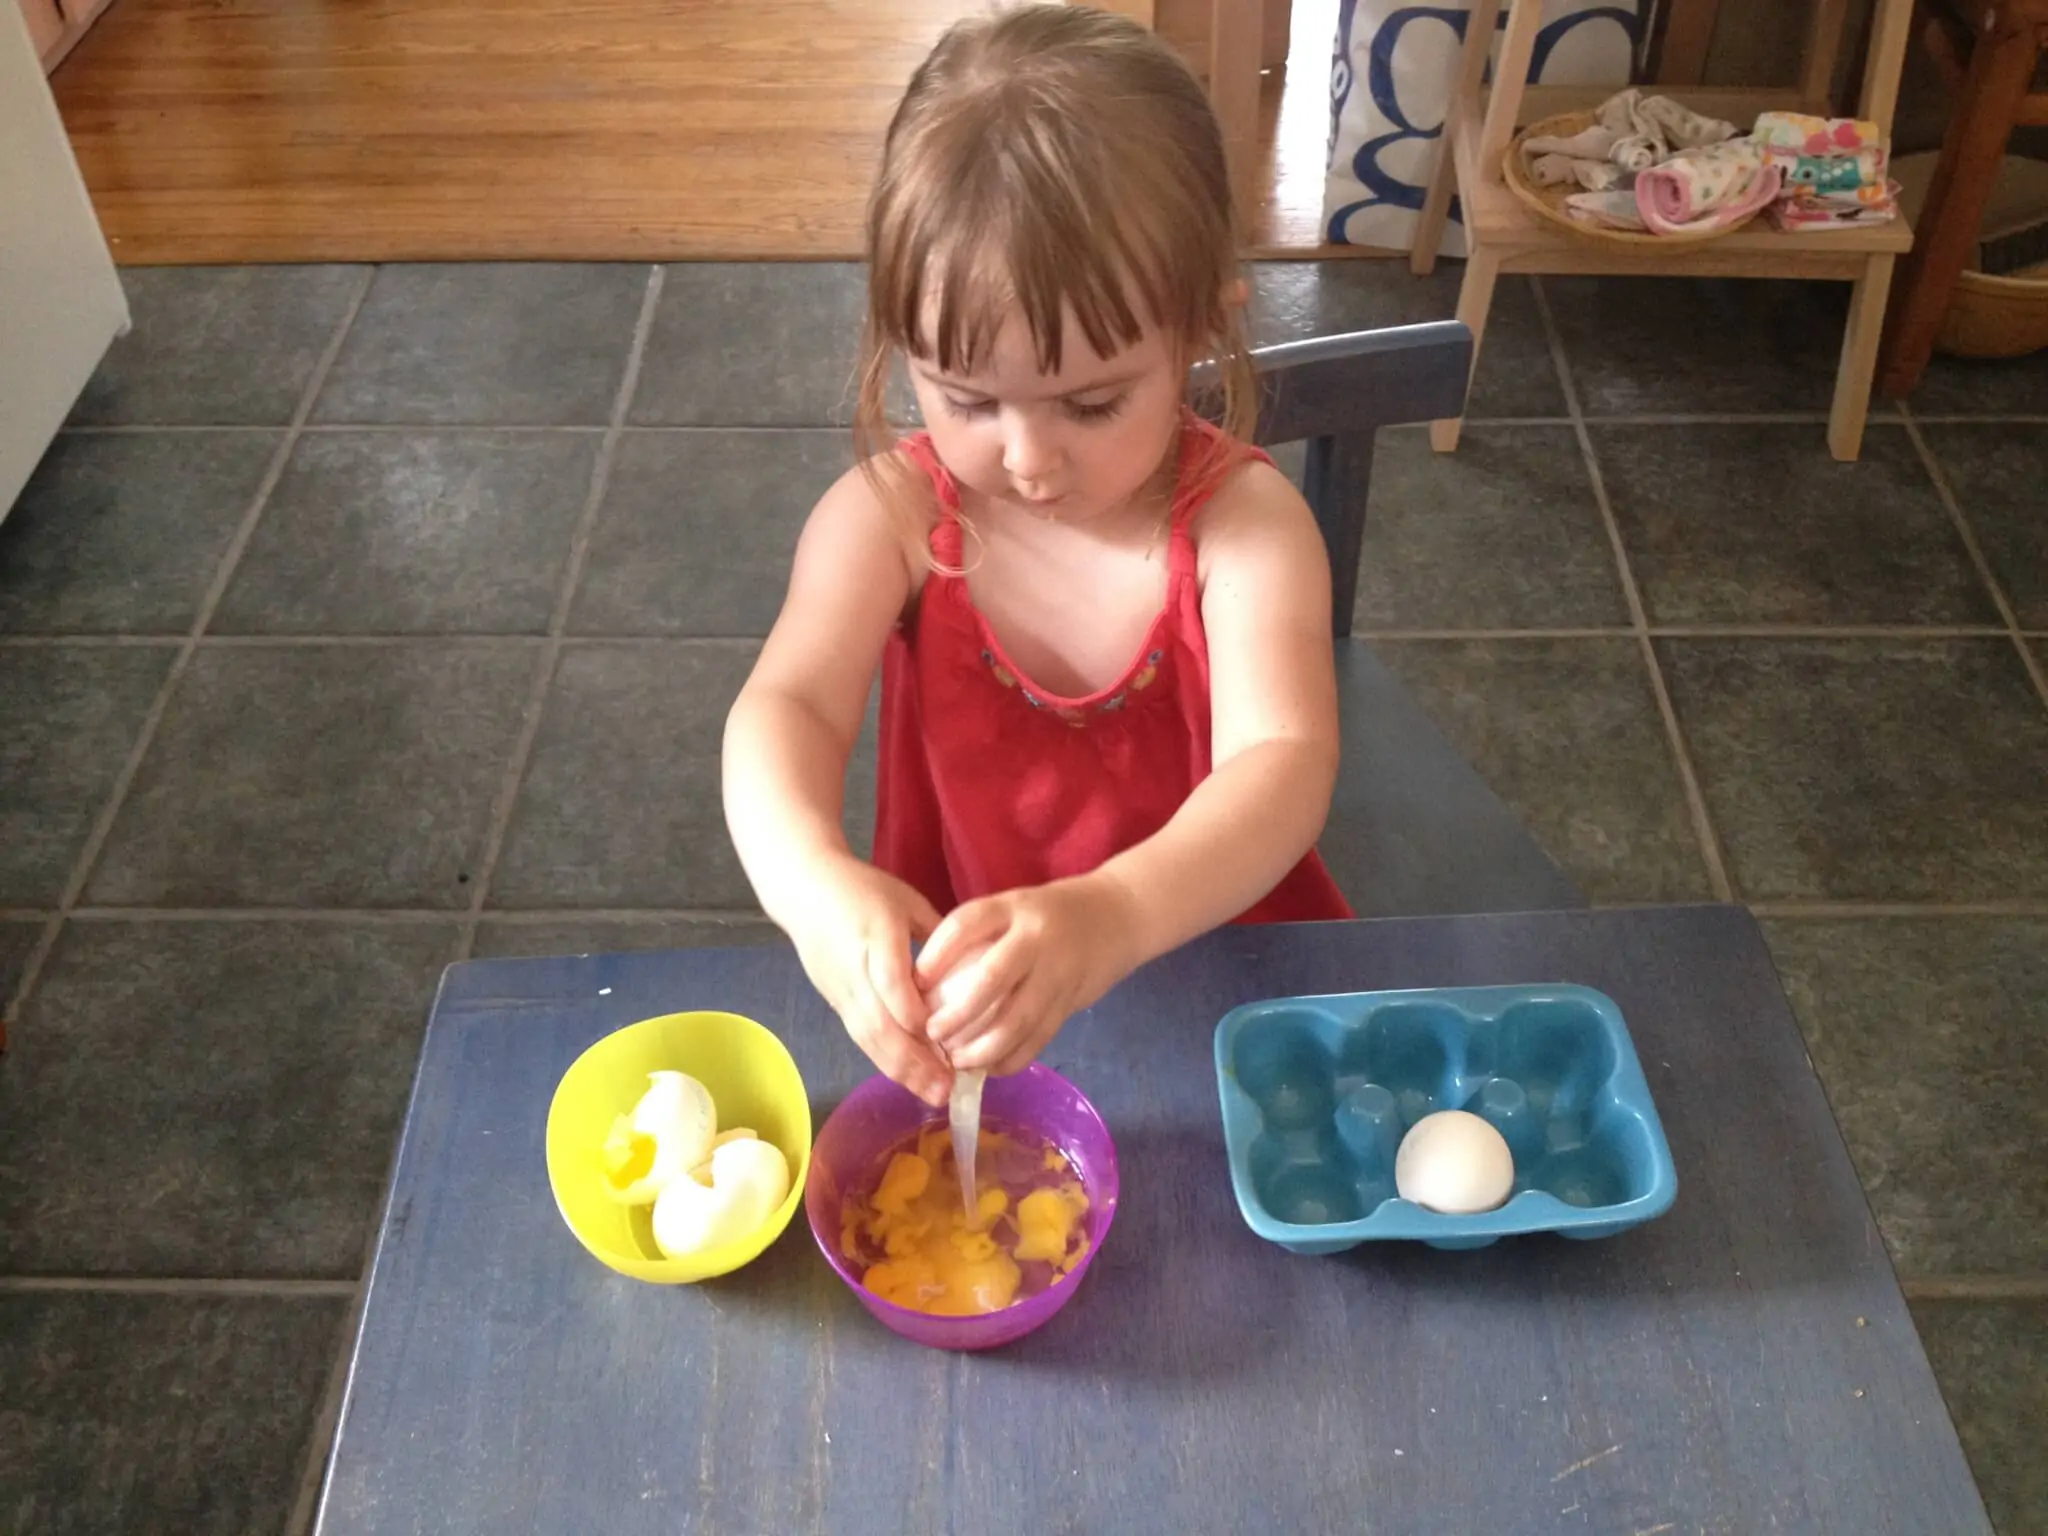 Making green eggs after reading Dr. Seuss's green eggs and ham